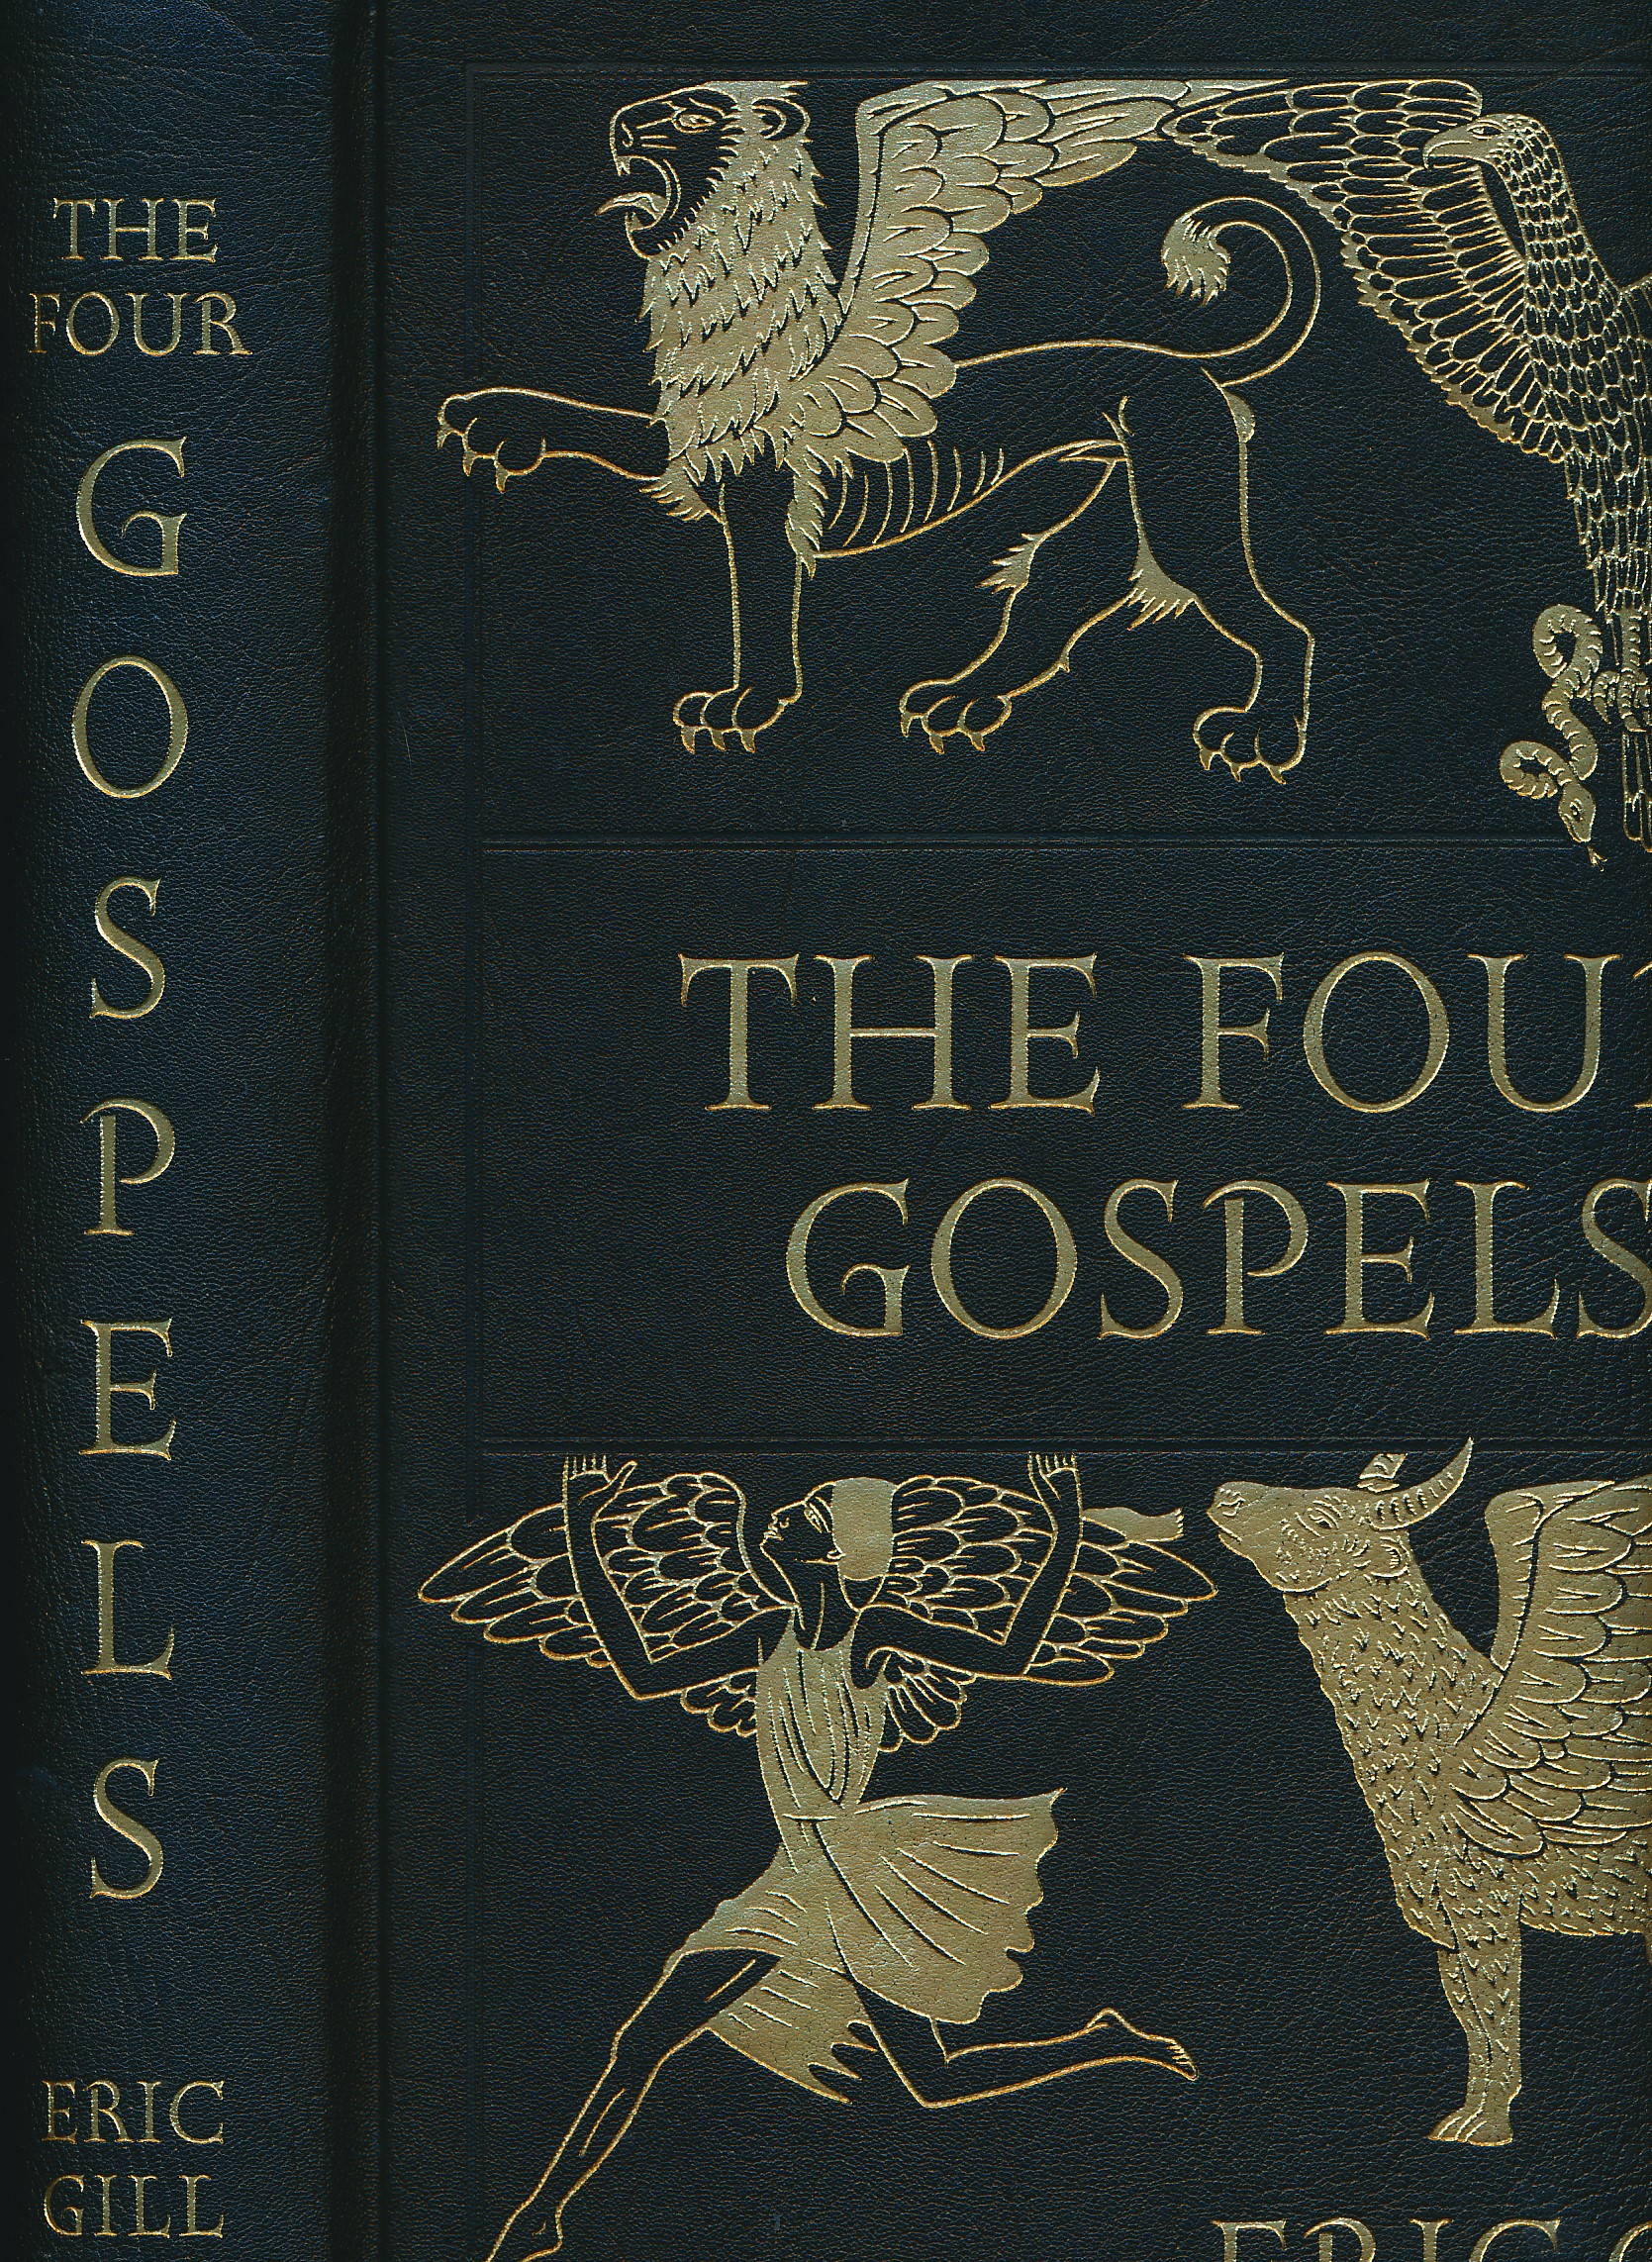 The Four Gospels of the Lord Jesus Christ According to the Authorized Version of King James I. Limited edition. 2 volume set.